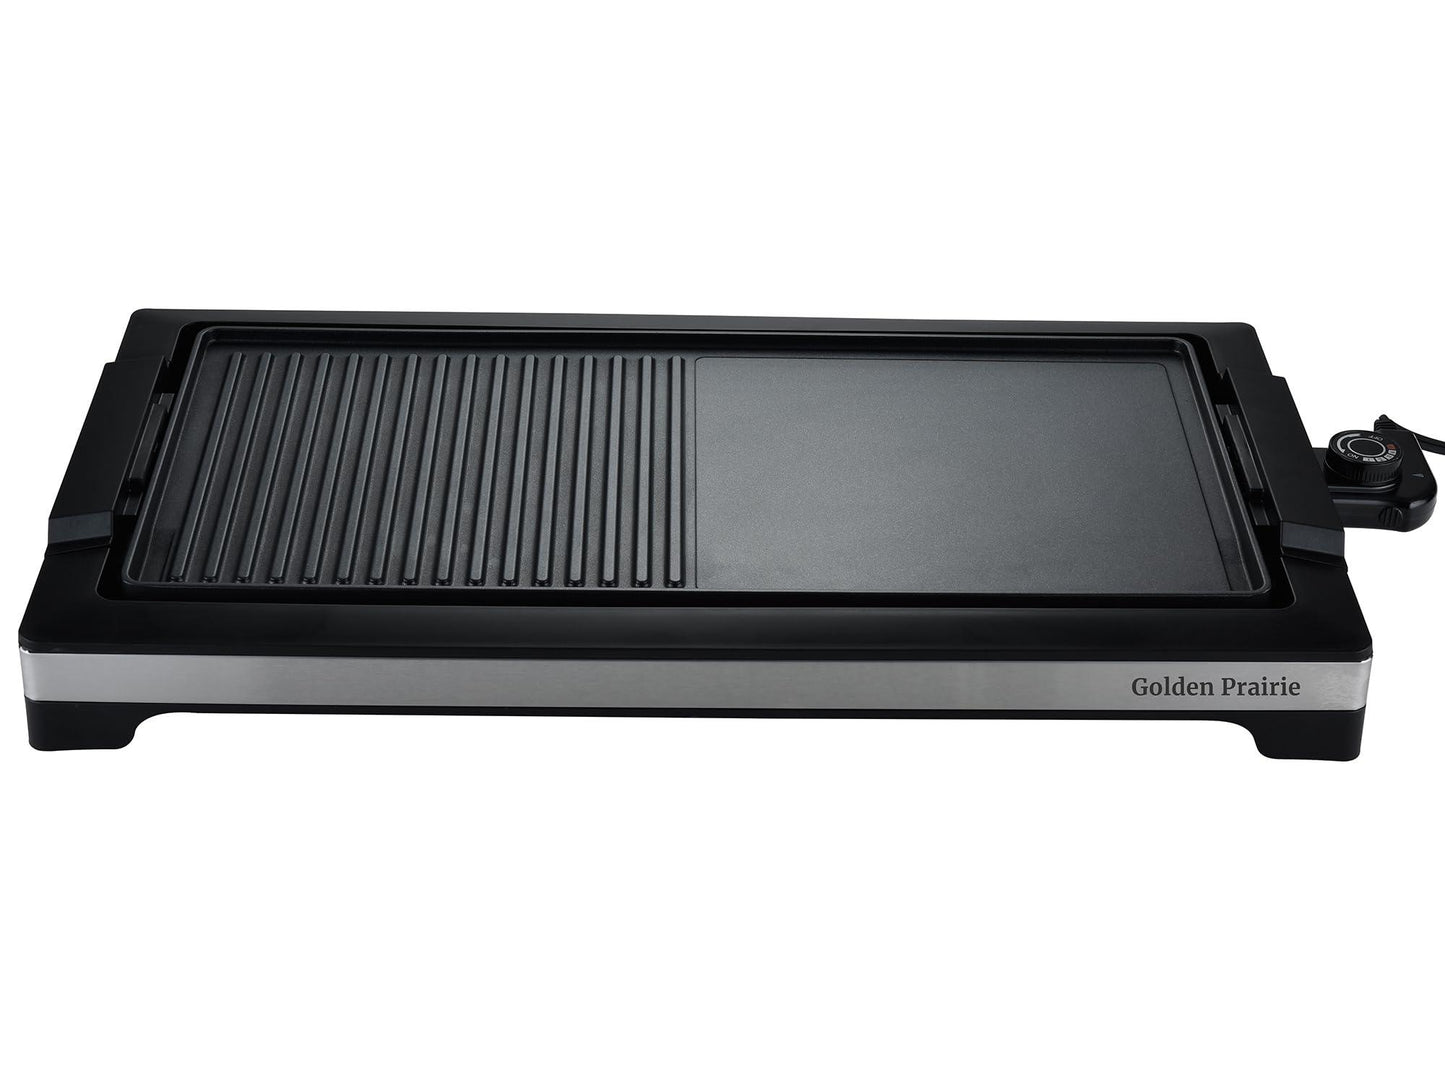 2-in-1 Grill & Griddle, Electric Smokeless Indoor Grill, 1800W Fast Heat Up BBQ Grill, Nonstick Cooking Plate, 5 Levels Adjustable Temperature, Detachable & Dishwasher Safe, Cool-touch Handles, Black - CookCave